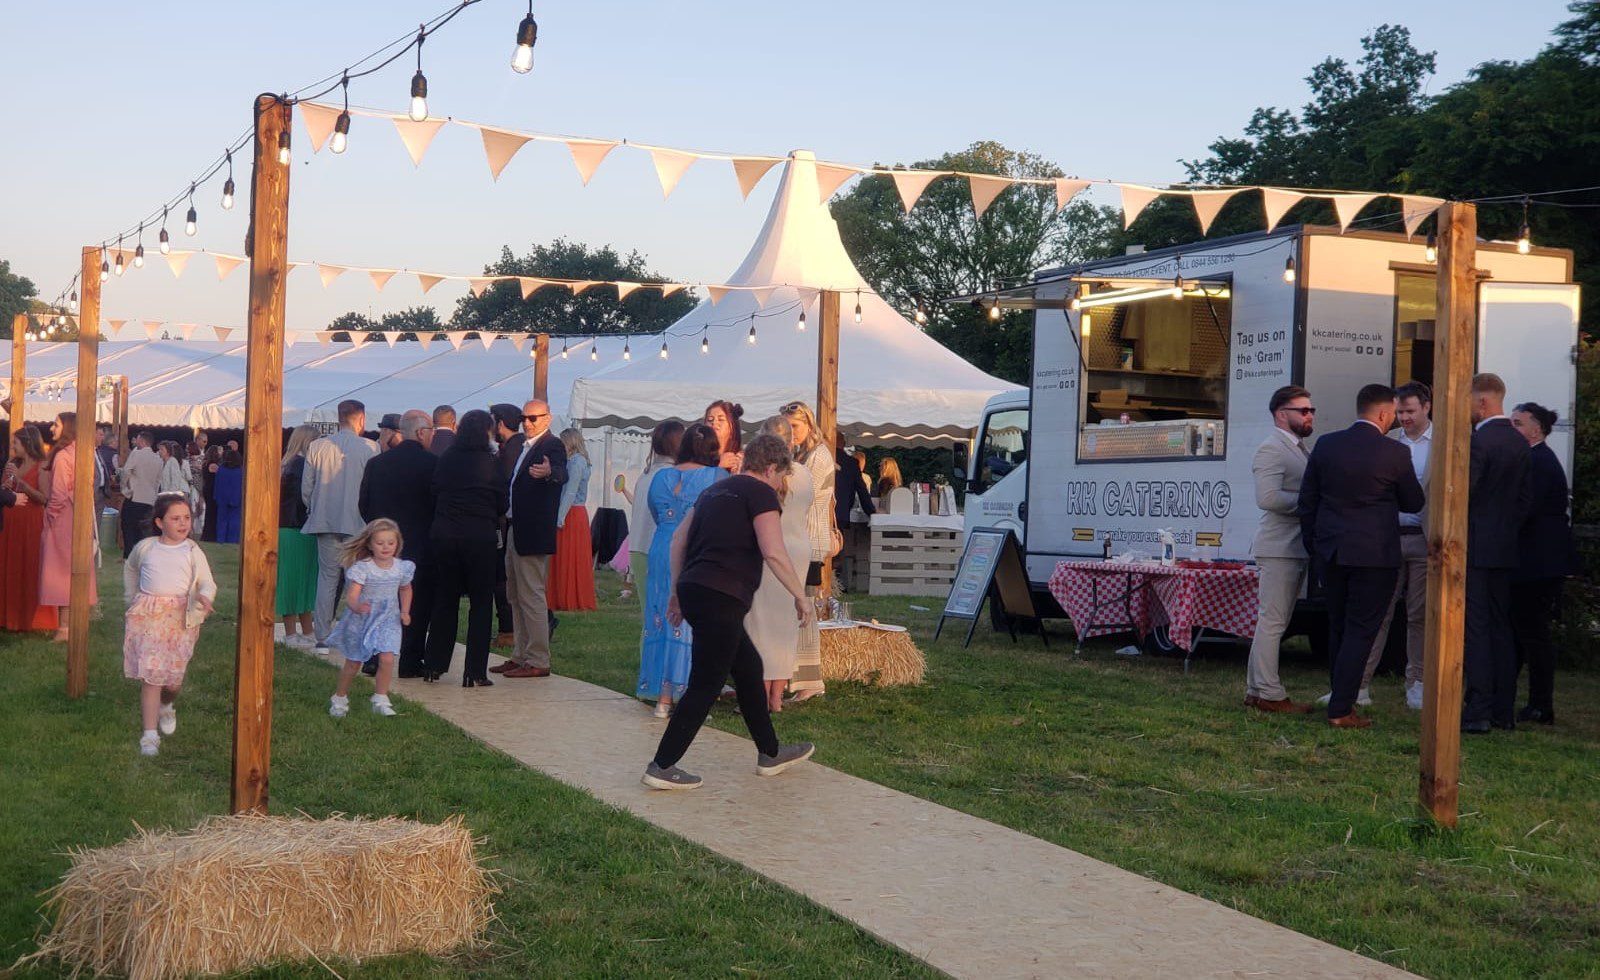 fish and chip van at a rustic outdoor wedding in the uk